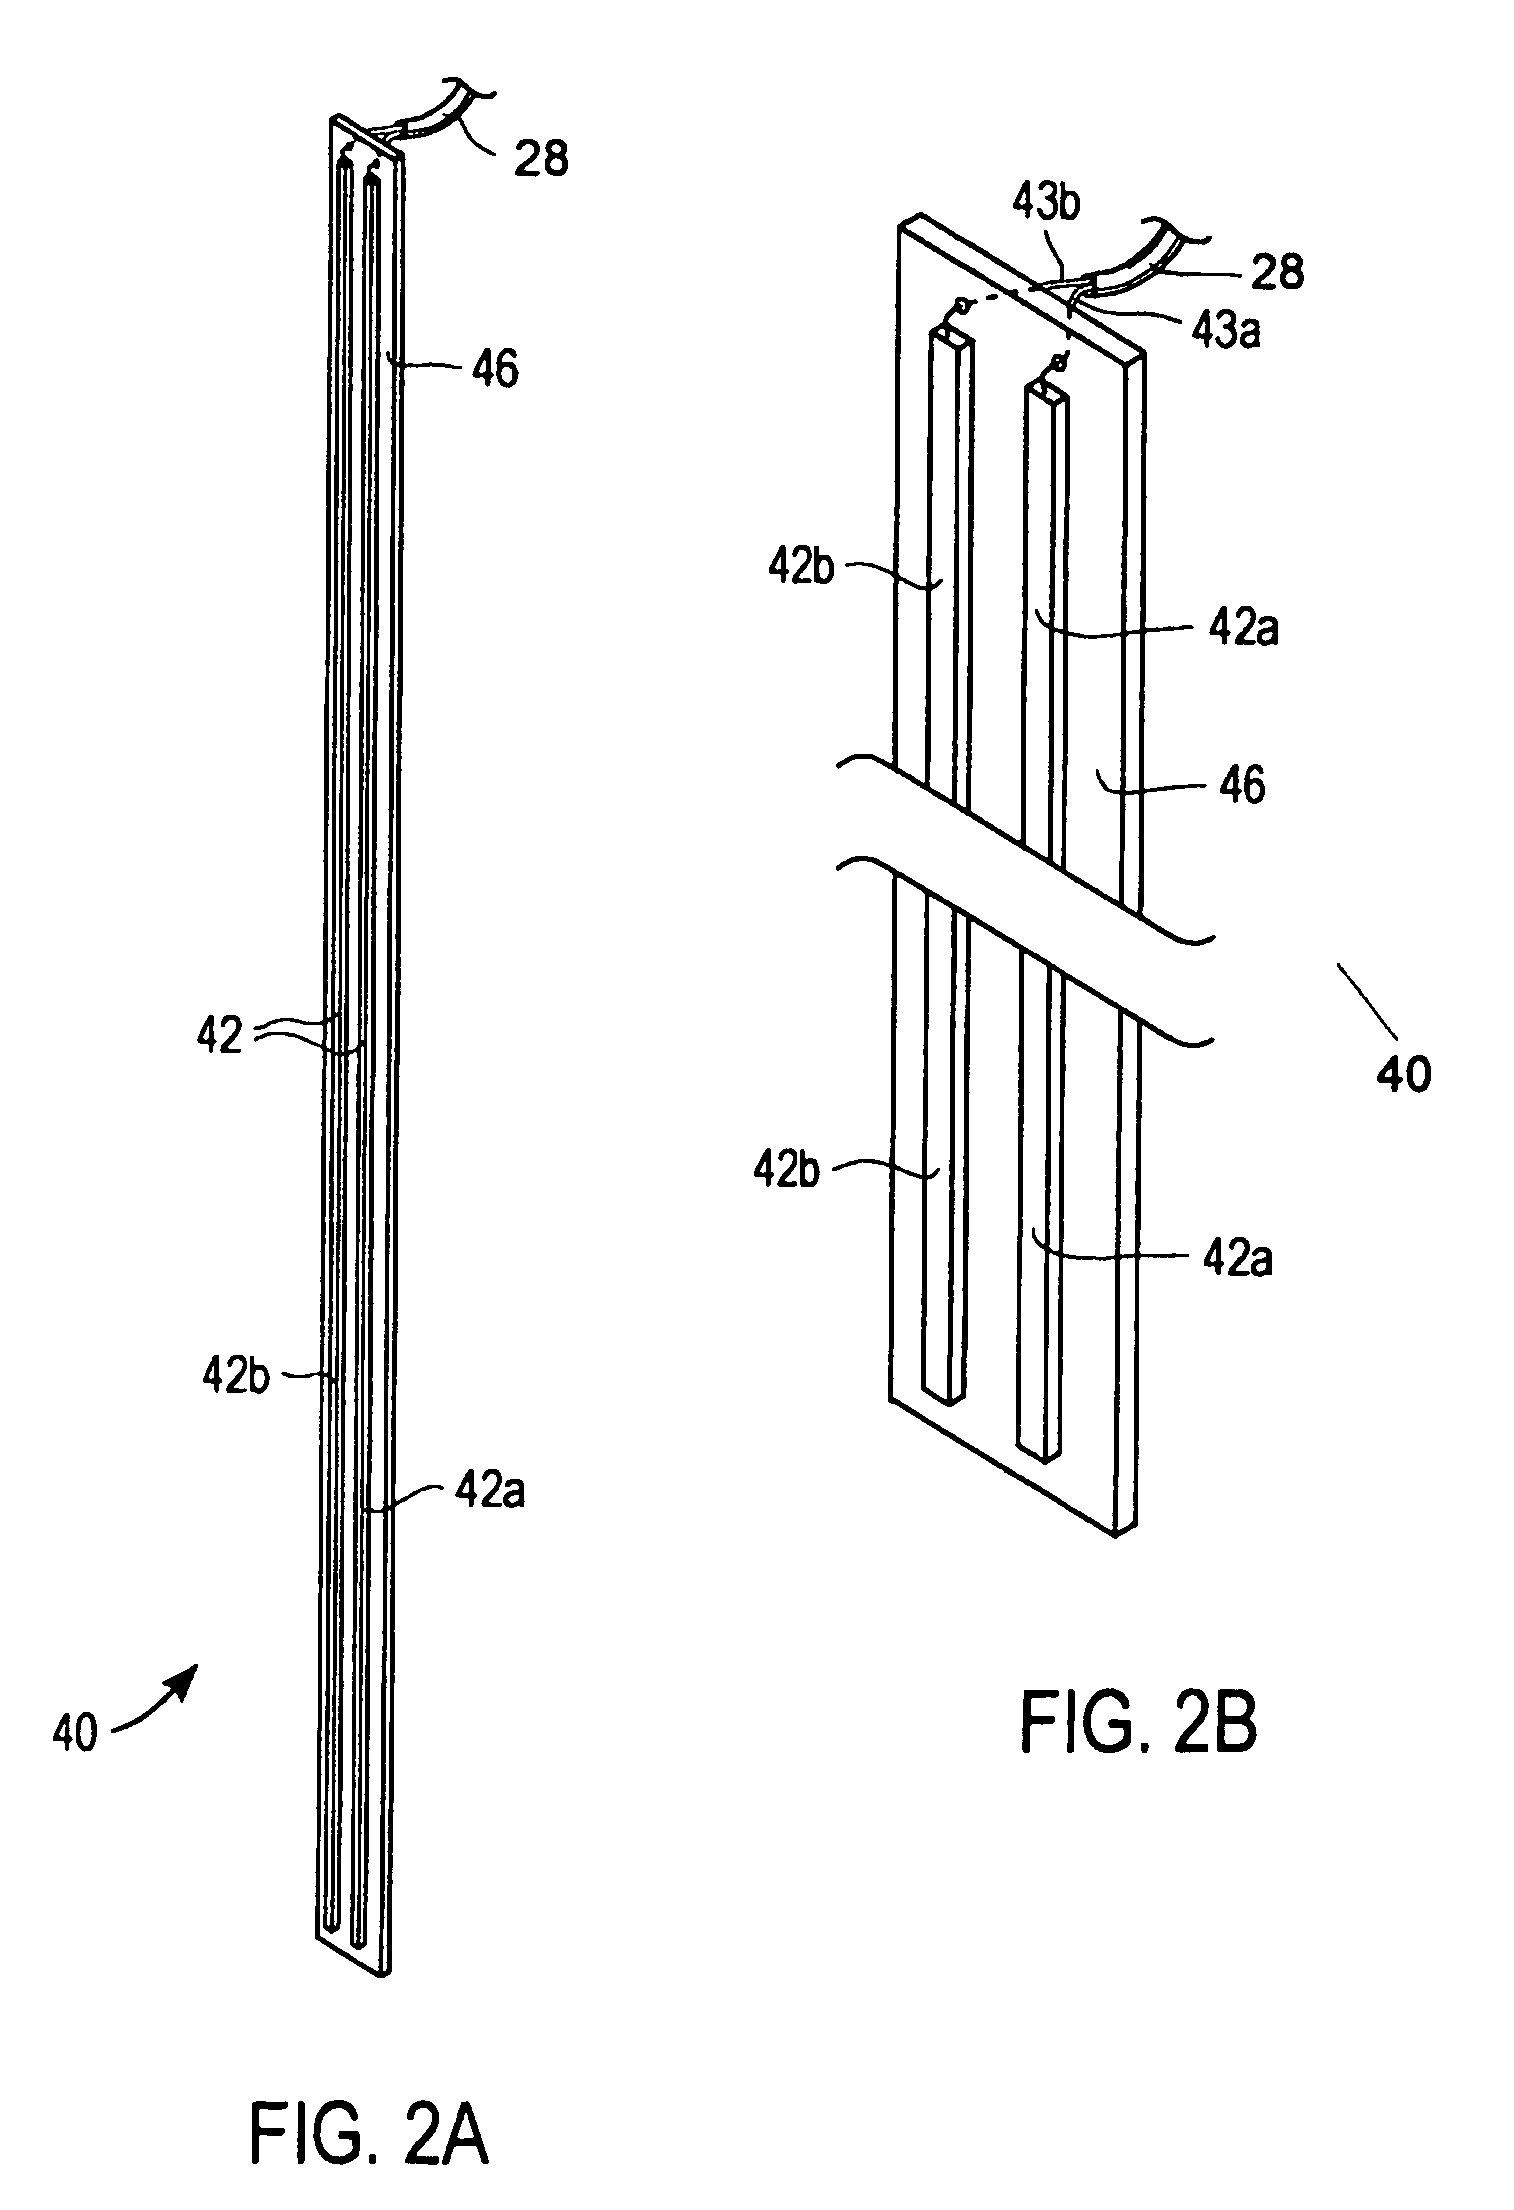 Apparatus and methods for monitoring water consumption and filter usage